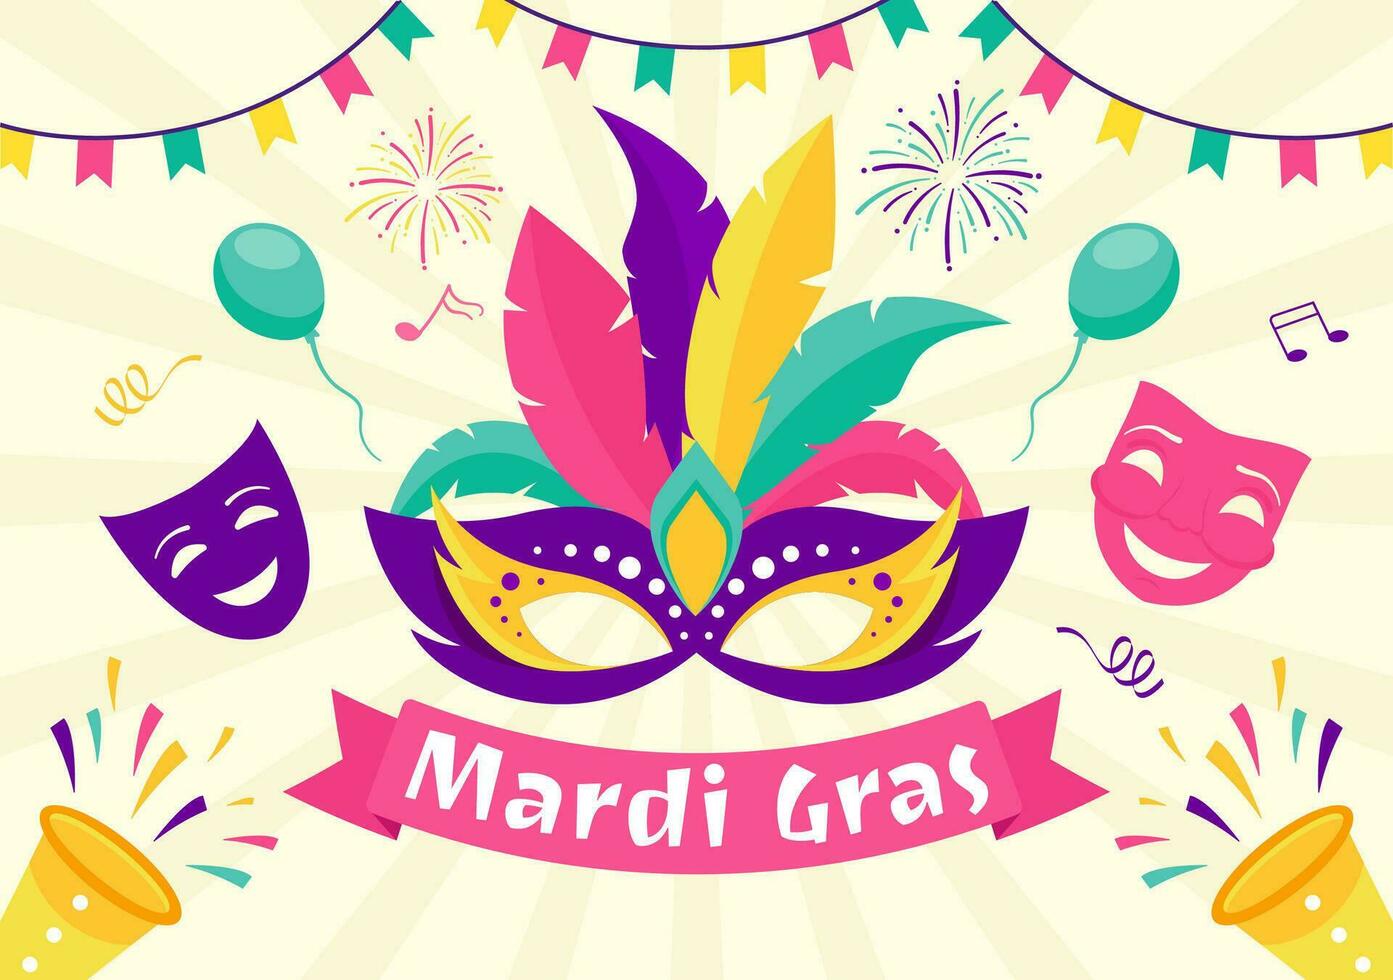 Mardi Gras Carnival Vector Illustration. Translation is French for Fat Tuesday. Festival with Masks, Maracas, Guitar and Feathers on Purple Background